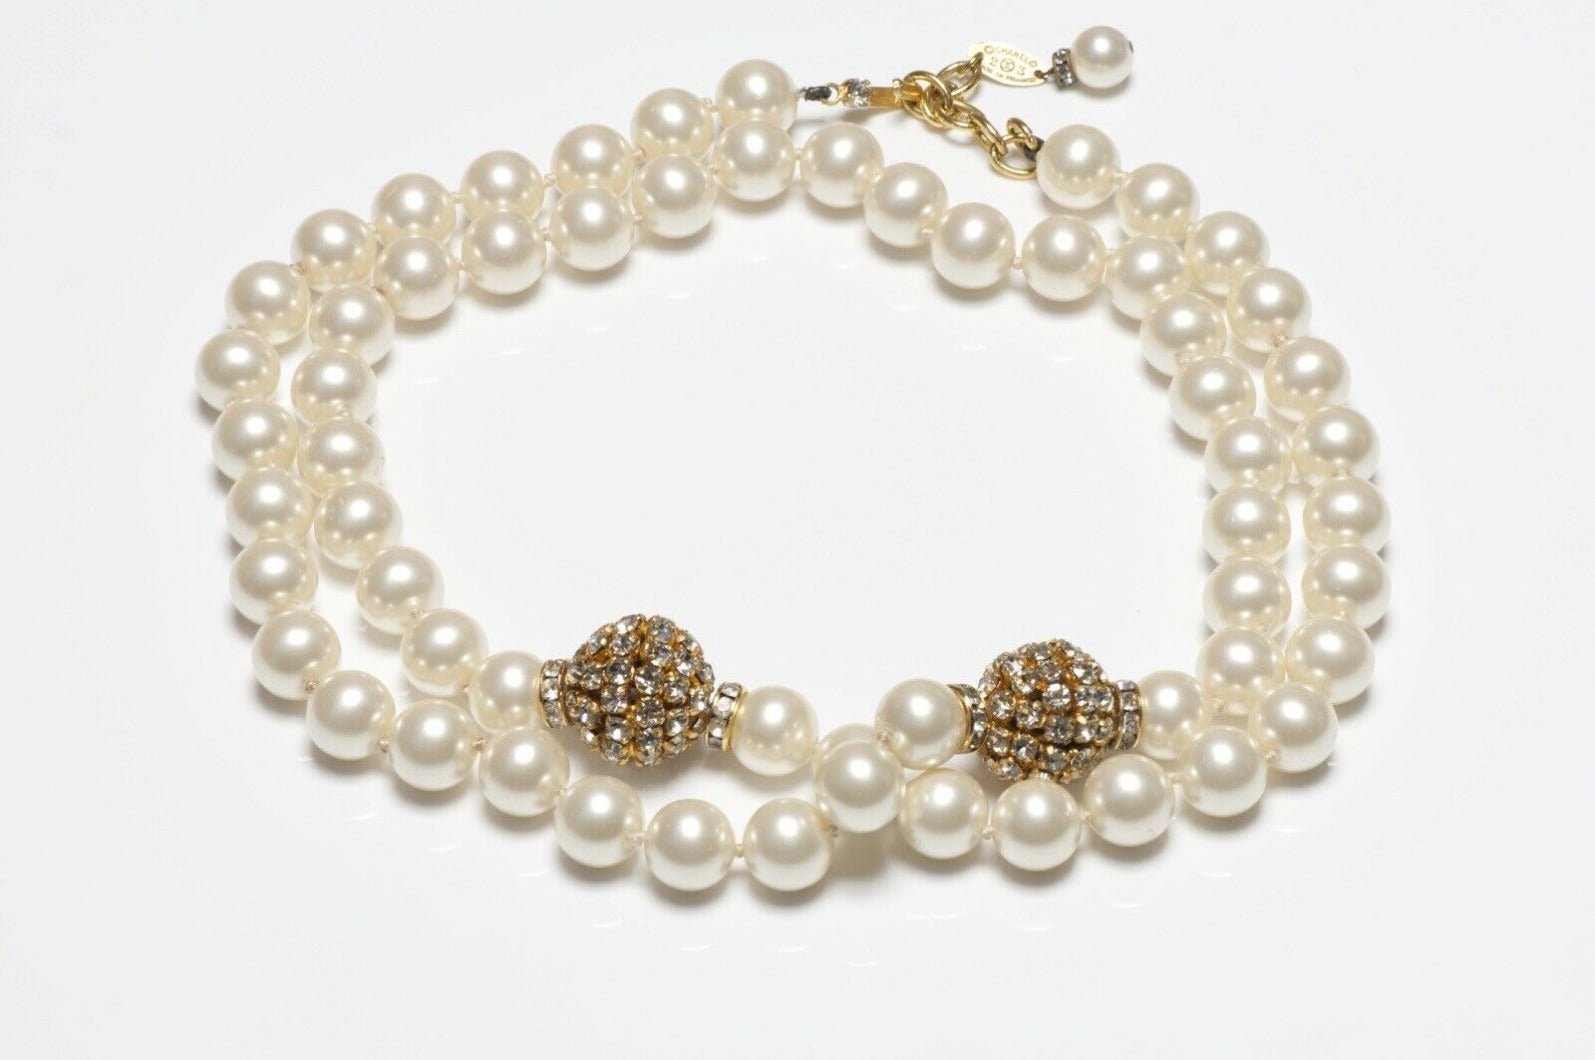 CHANEL Paris 1980’s Crystal Pearl Strand Necklace - DSF Antique Jewelry